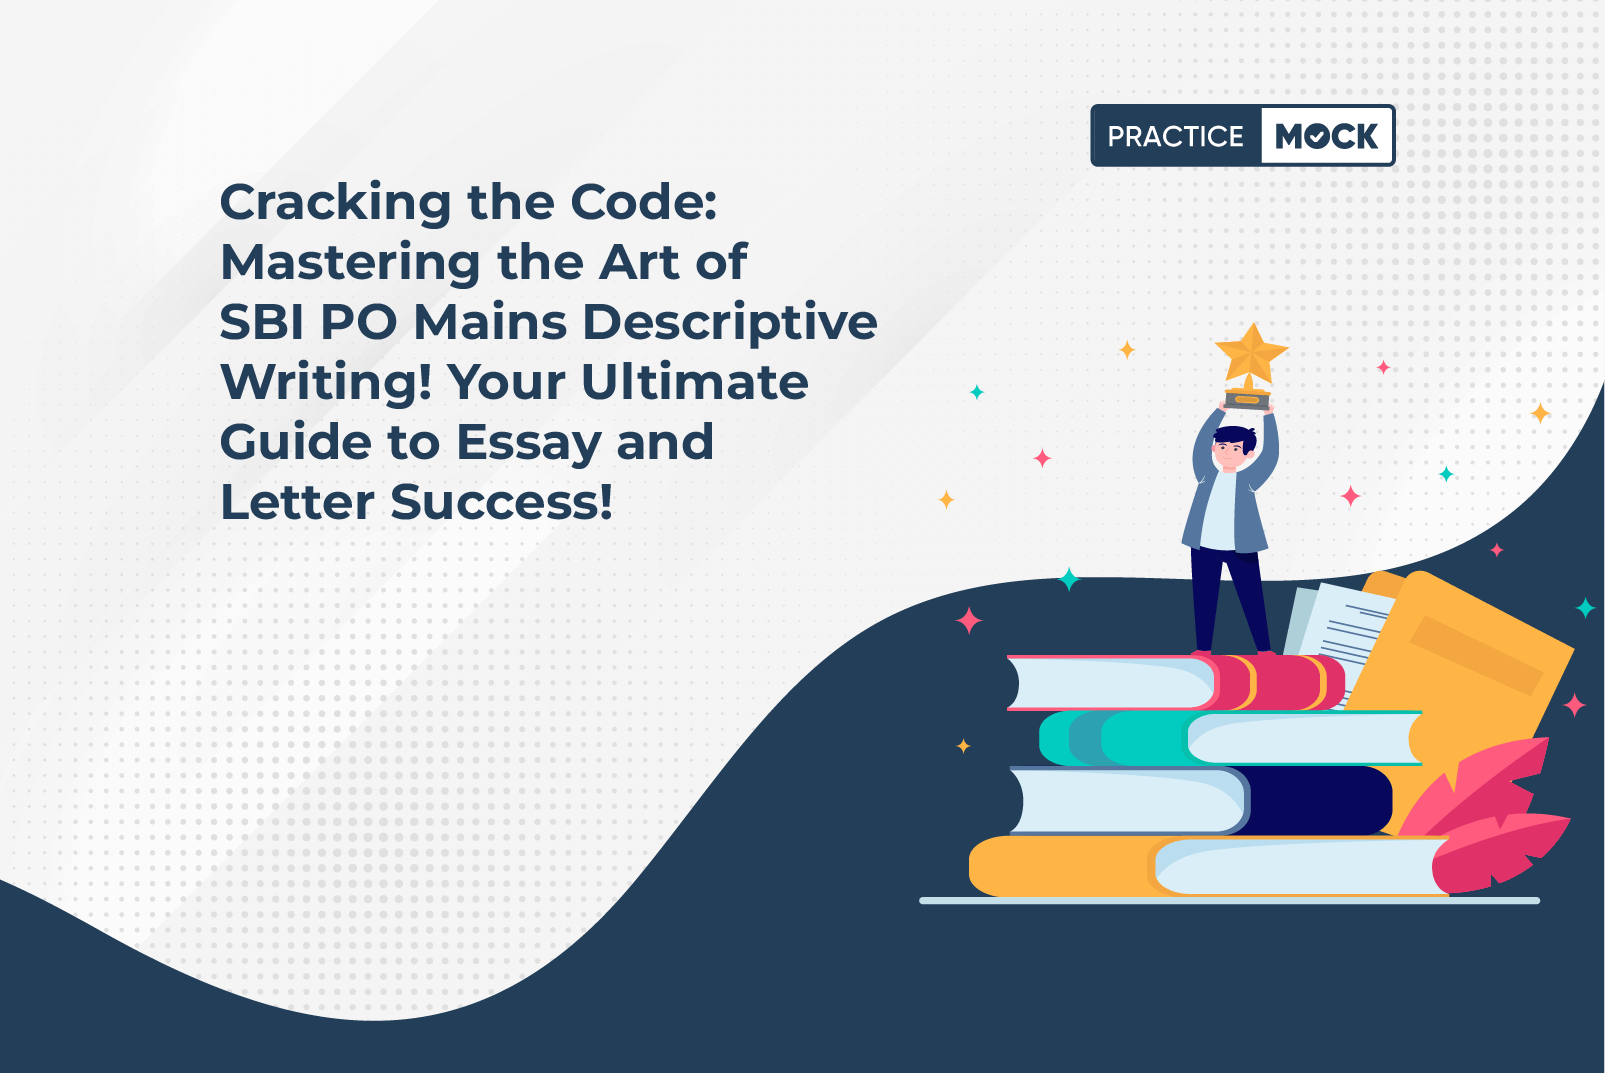 Cracking the Code Mastering the Art of SBI PO Mains Descriptive Writing! Your Ultimate Guide to Essay and Letter Success! (1)